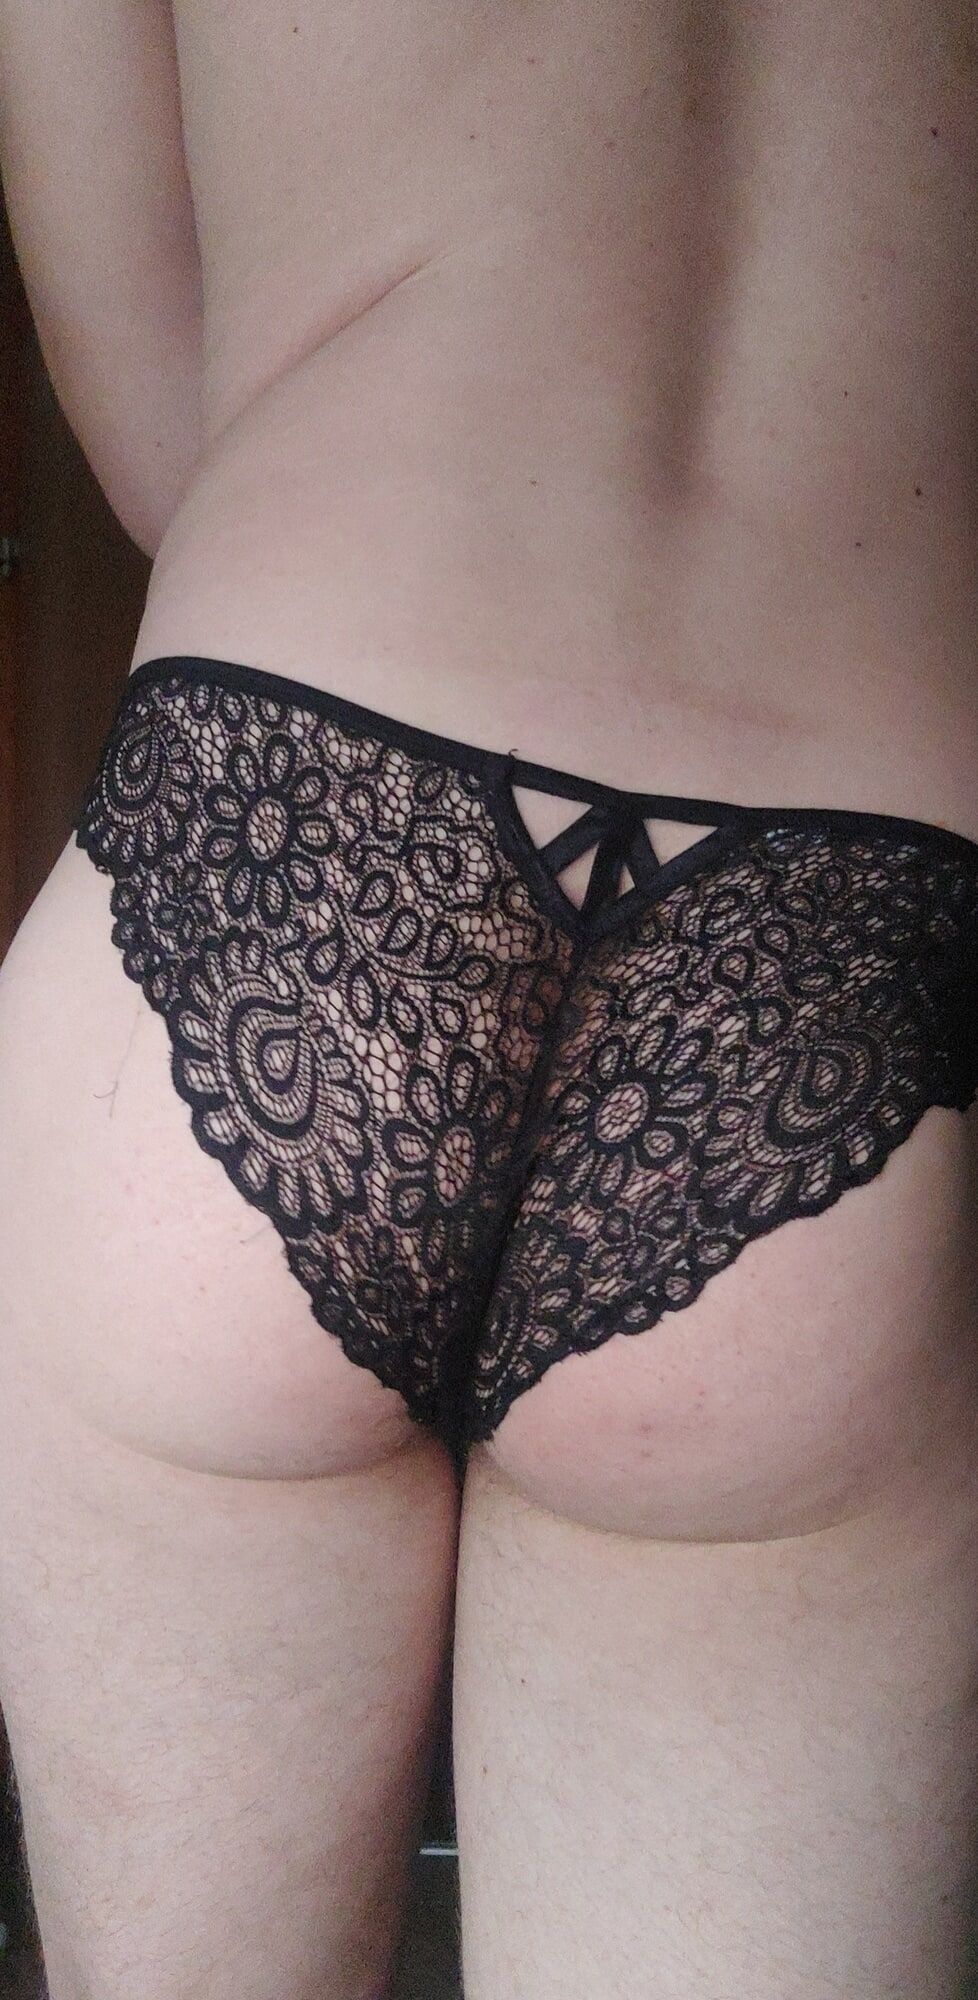 My ass in different panties #12